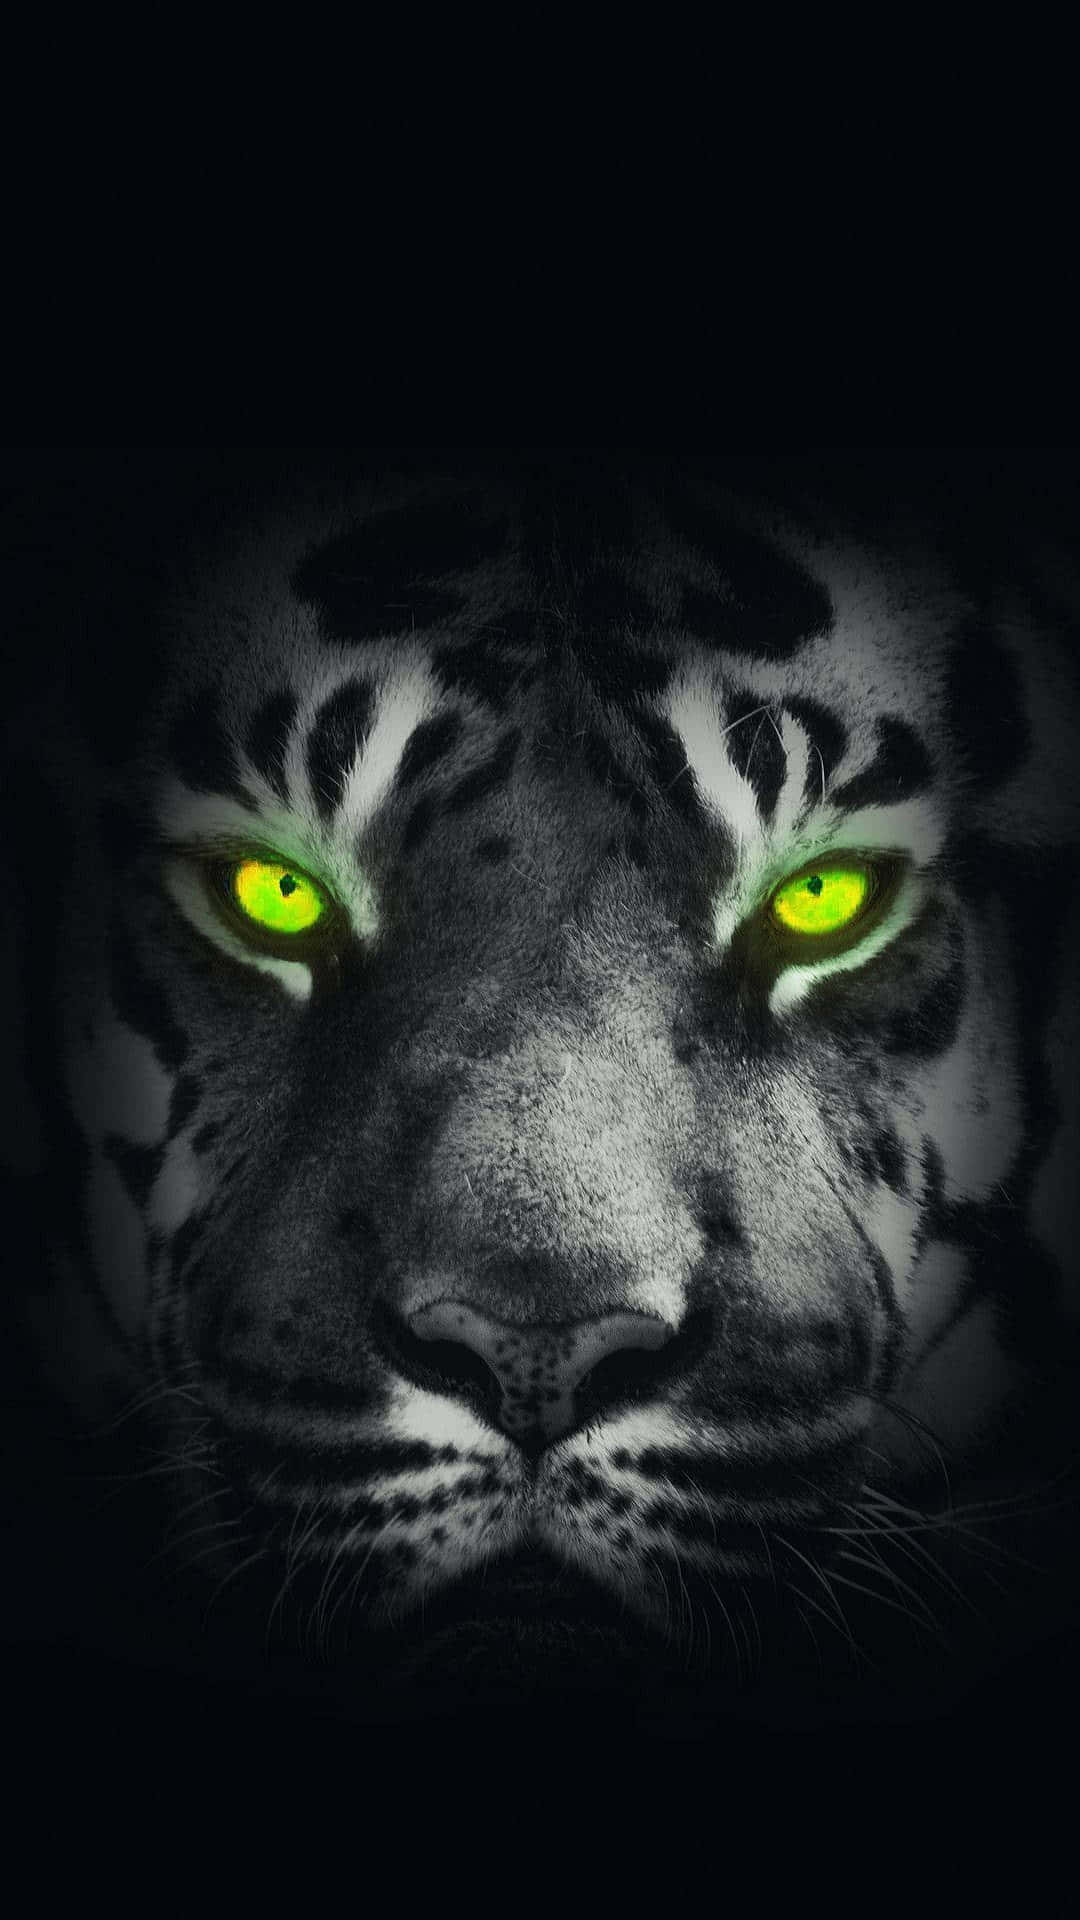 Tiger Face With Green Eyes Wallpaper